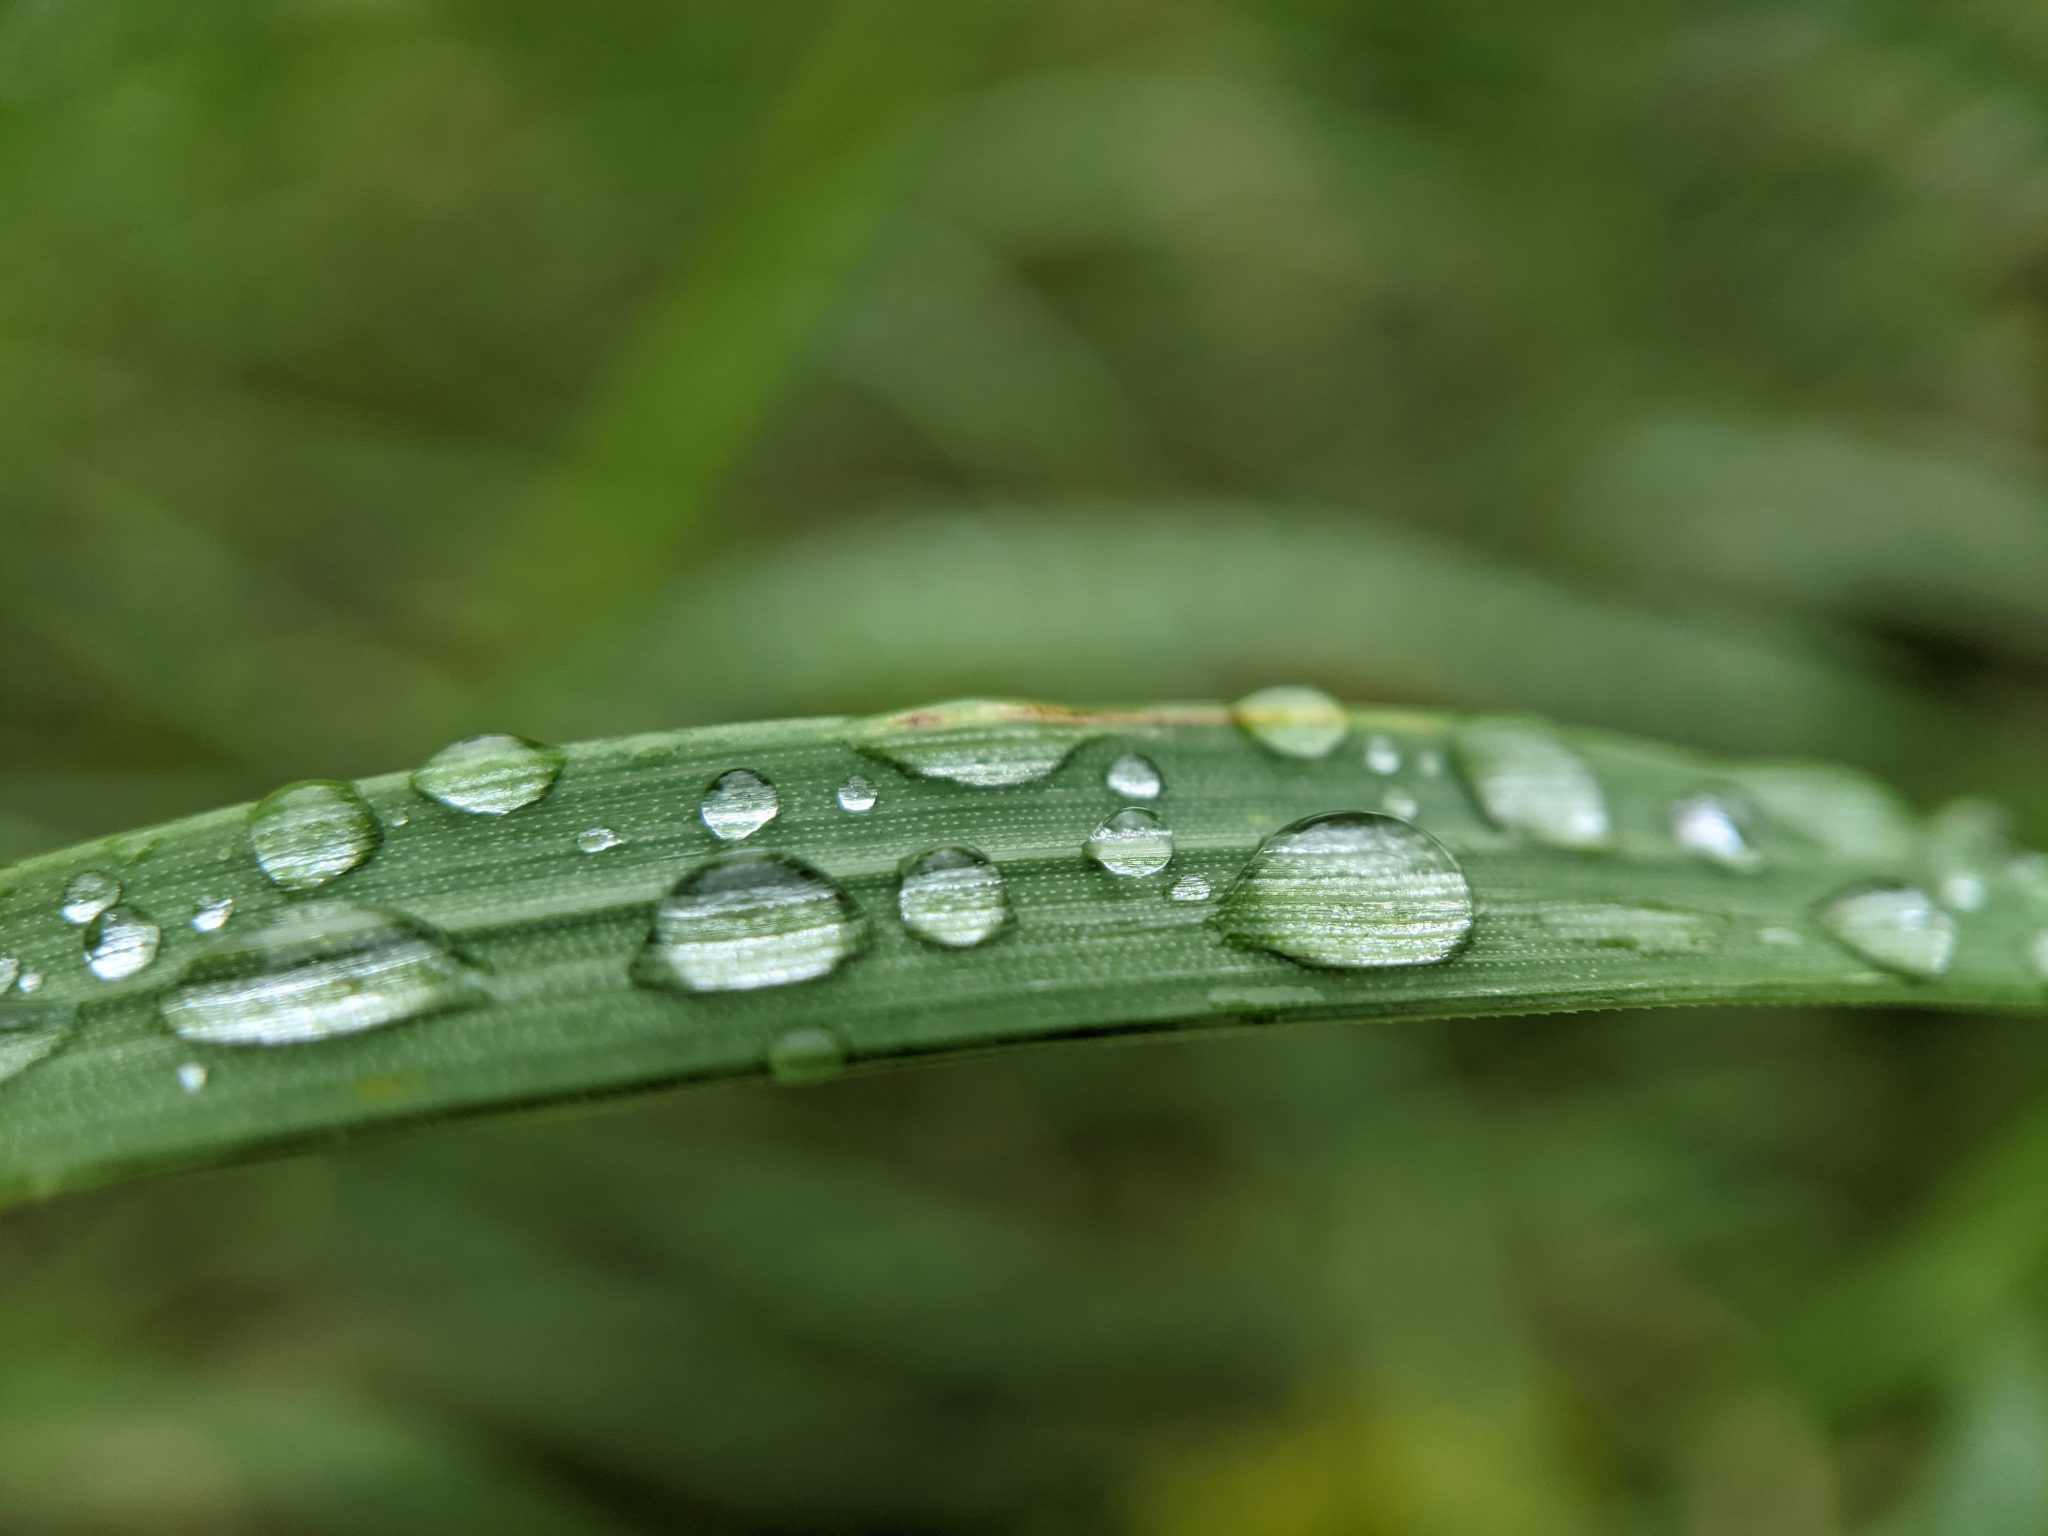 Water droplets on a blade of grass, quite close up.